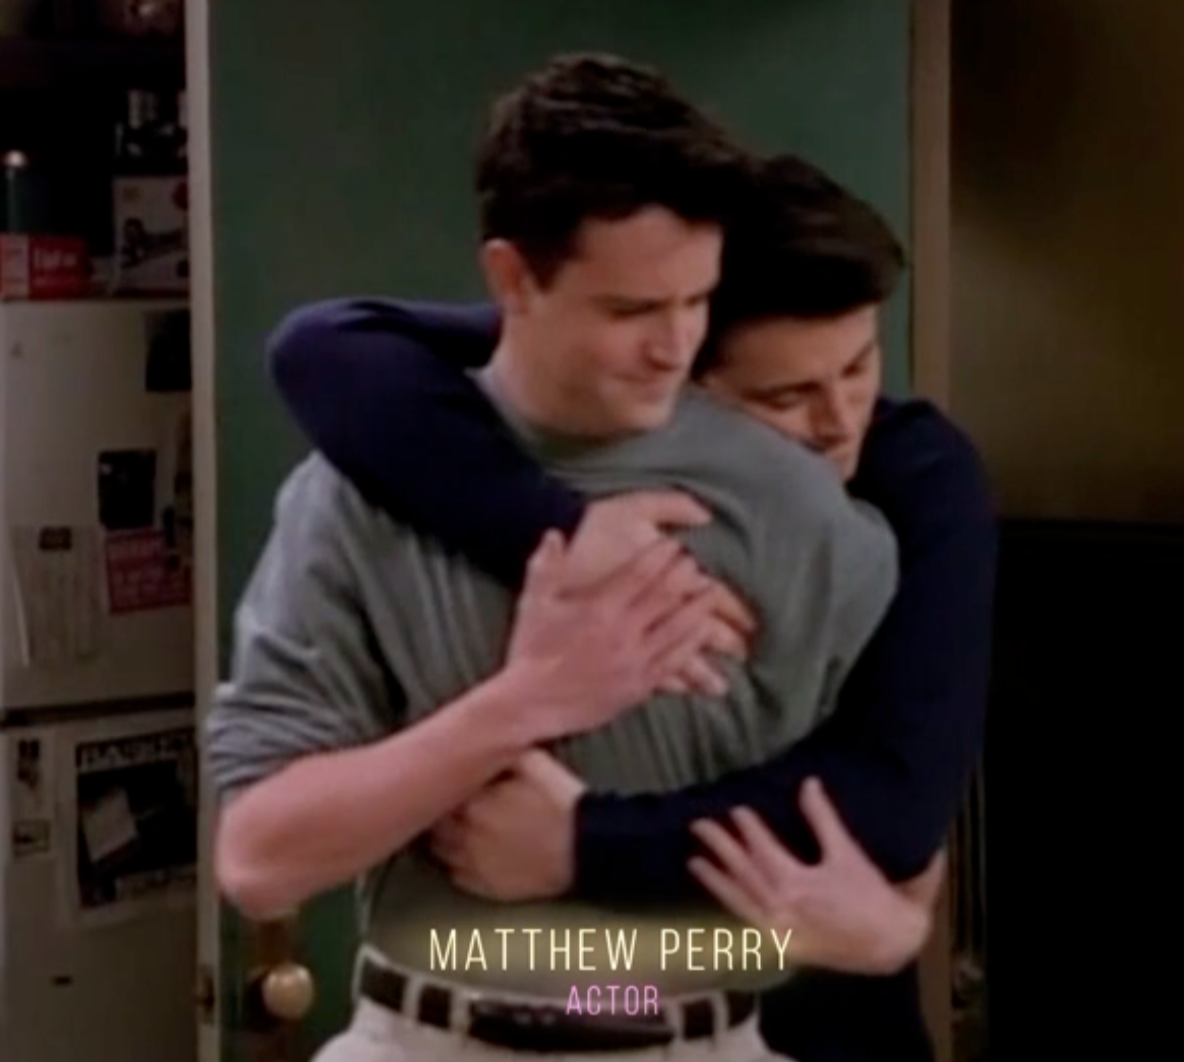 The tribute showed clips including of Joey and Chandler hugging